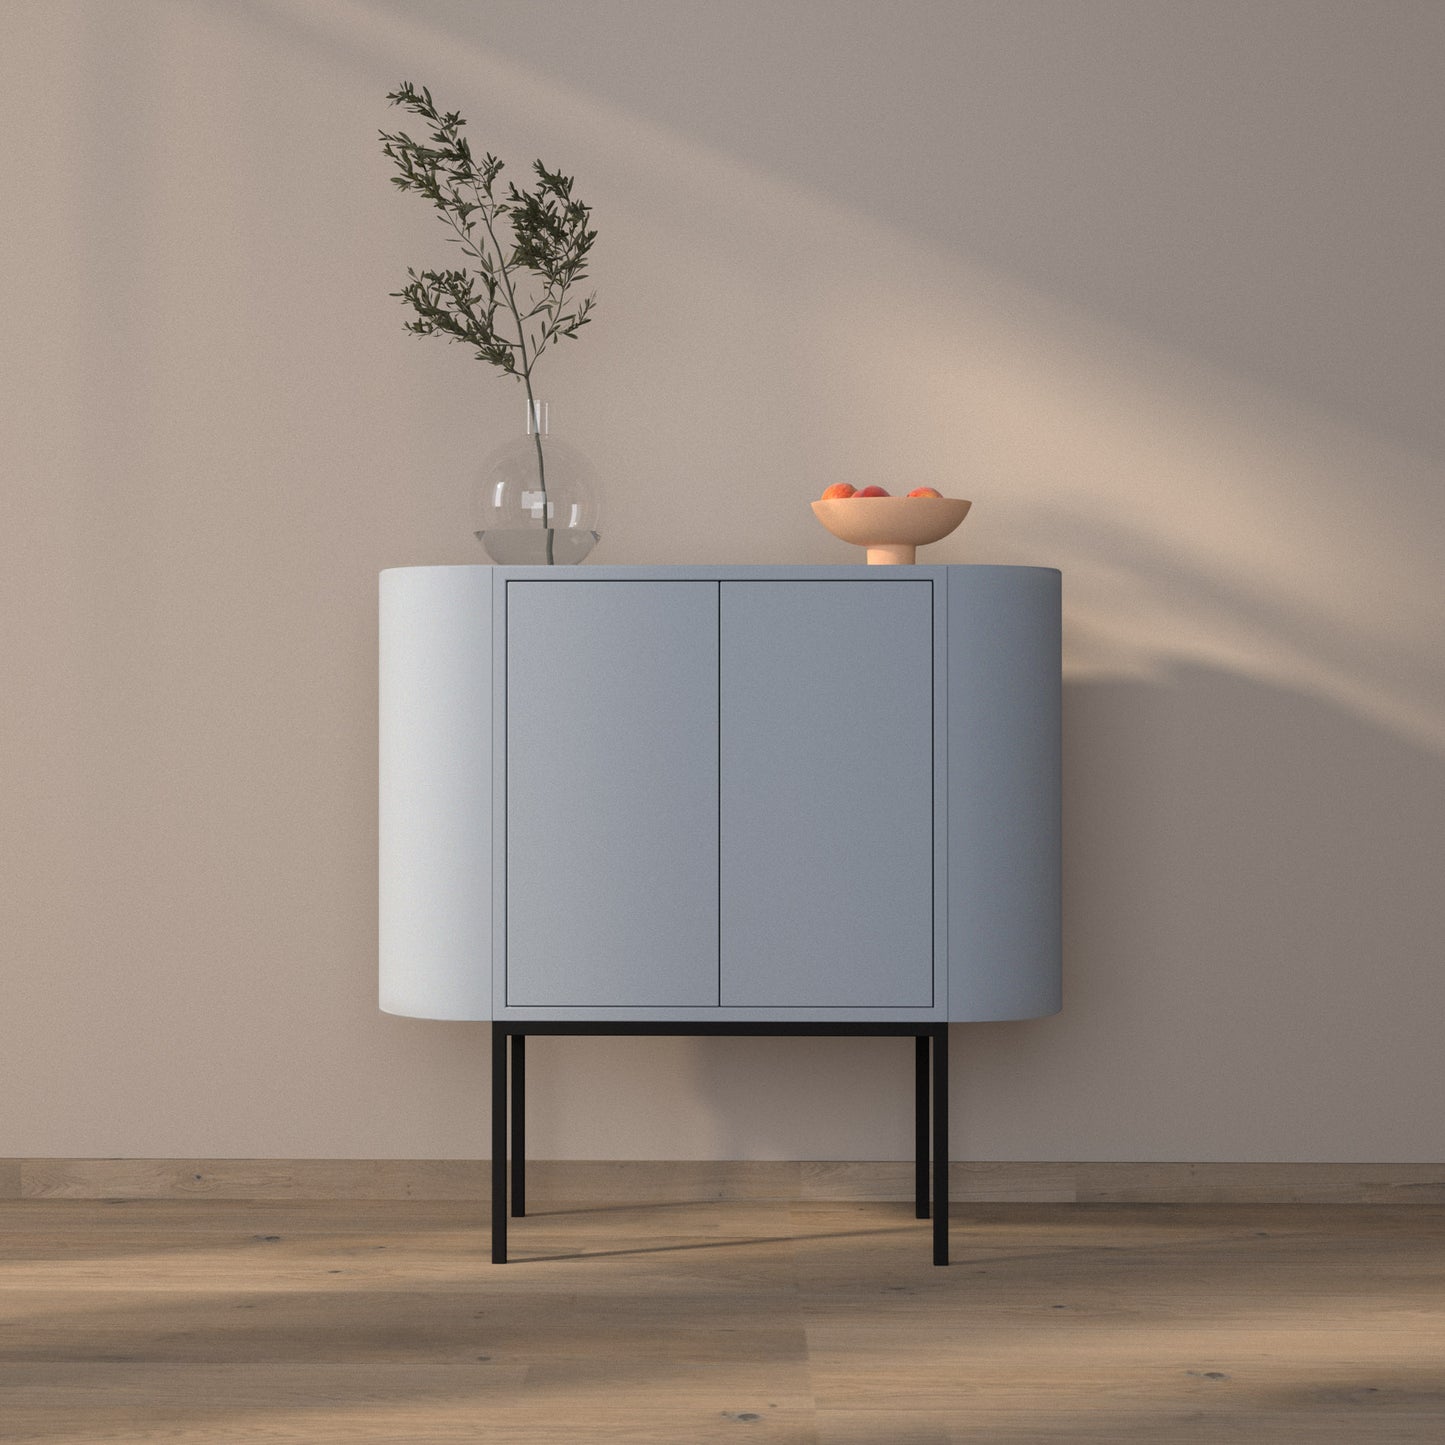 Siena 01 Sideboard in pigeon blue color, powder-coated steel, elegant and modern piece of furniture for your living room